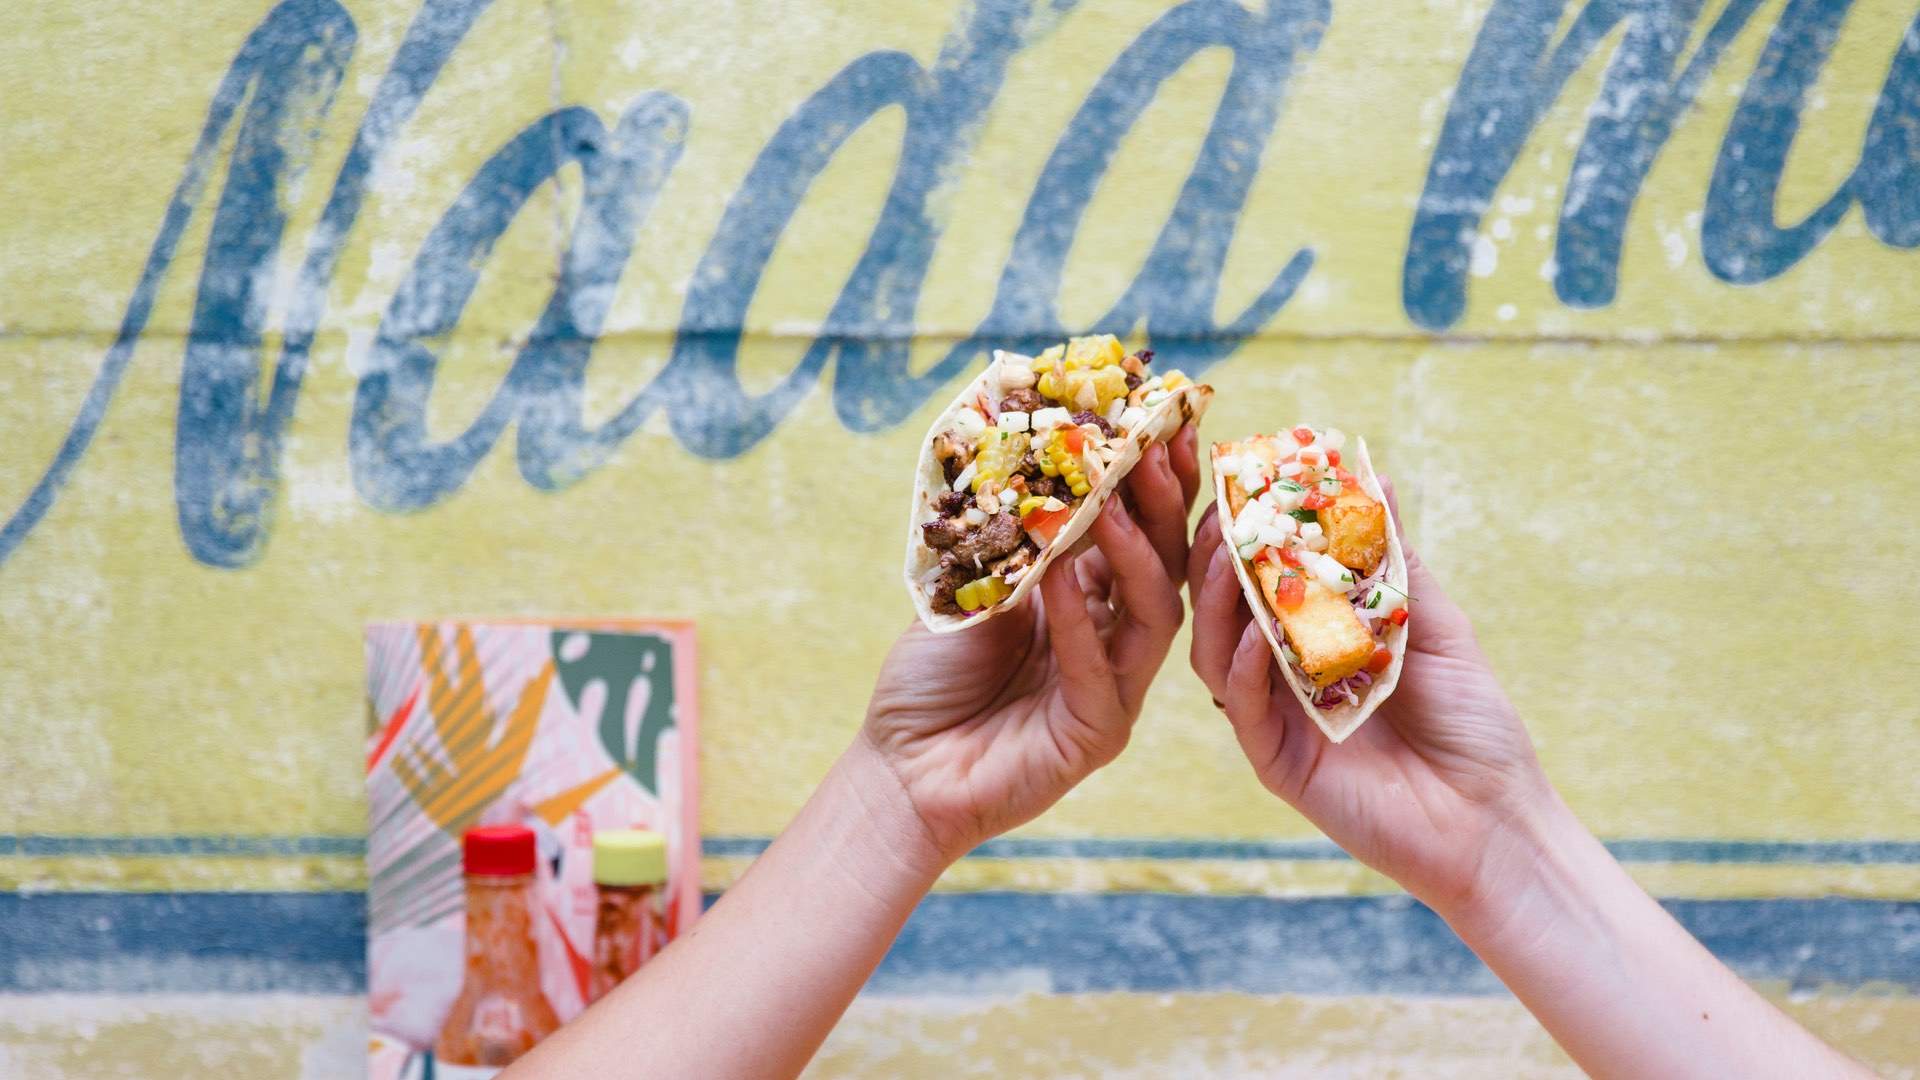 All-You-Can-Eat Tacos 2019